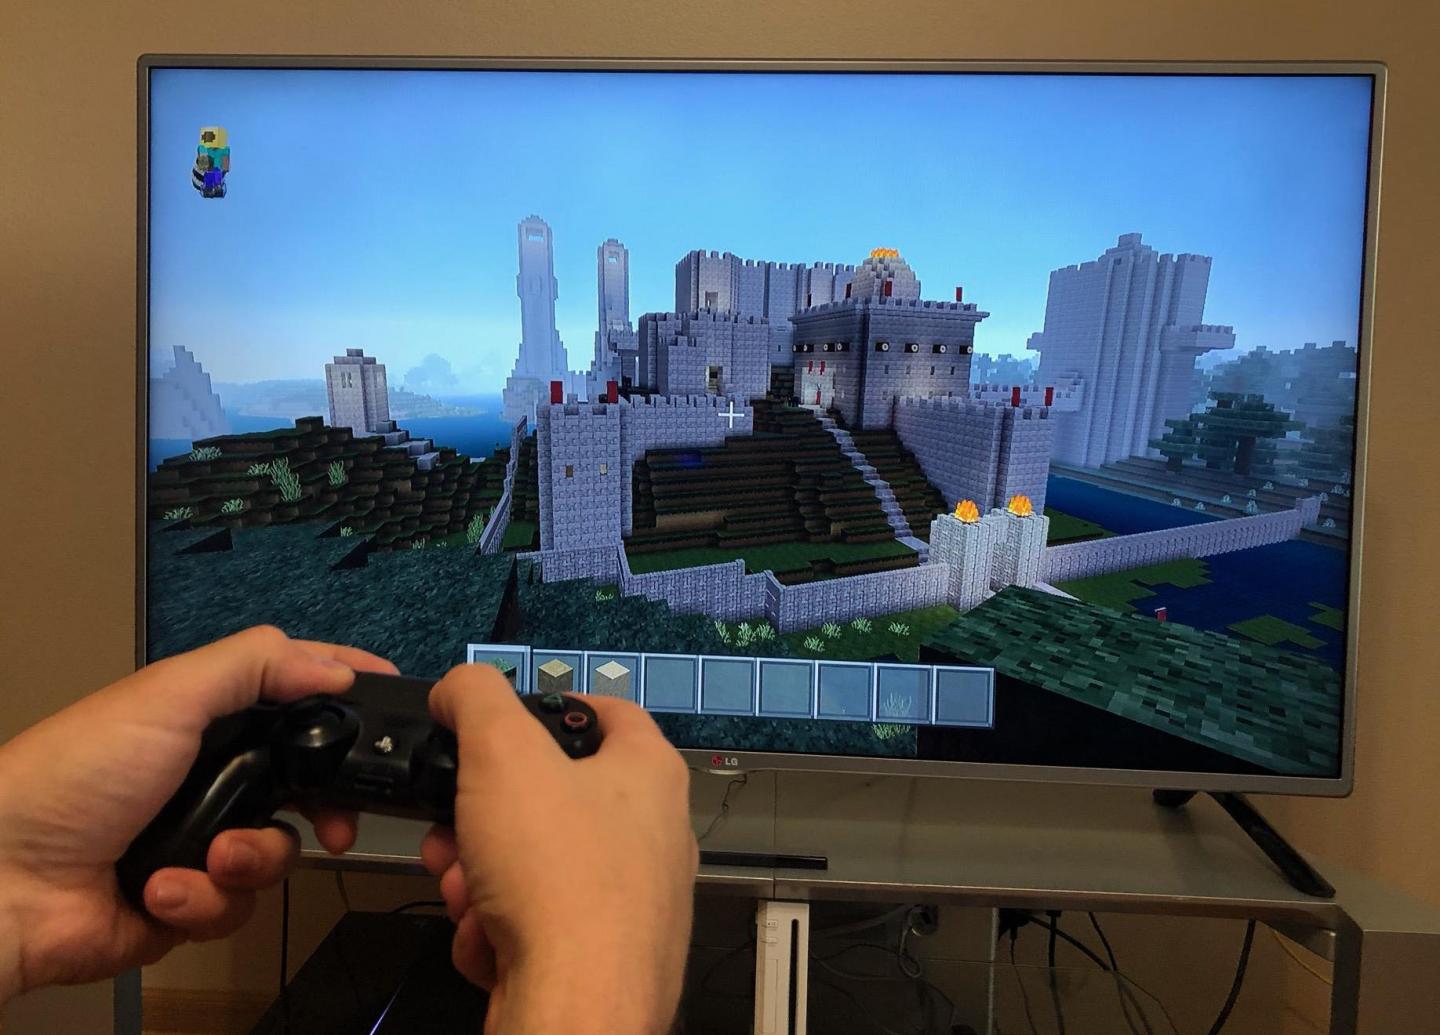 Want to boost creativity? Try playing Minecra